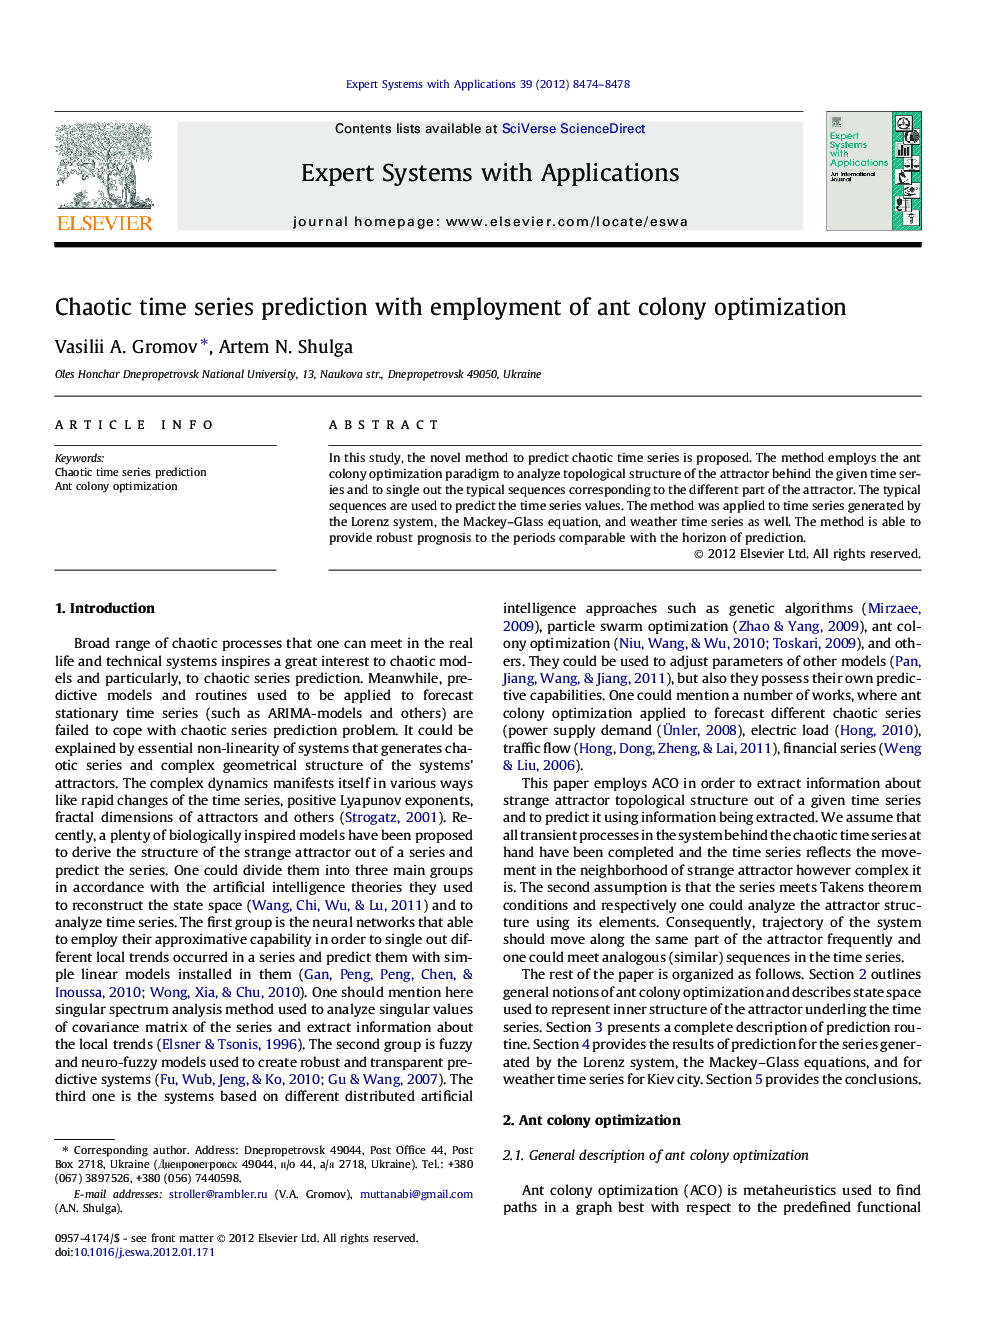 Chaotic time series prediction with employment of ant colony optimization